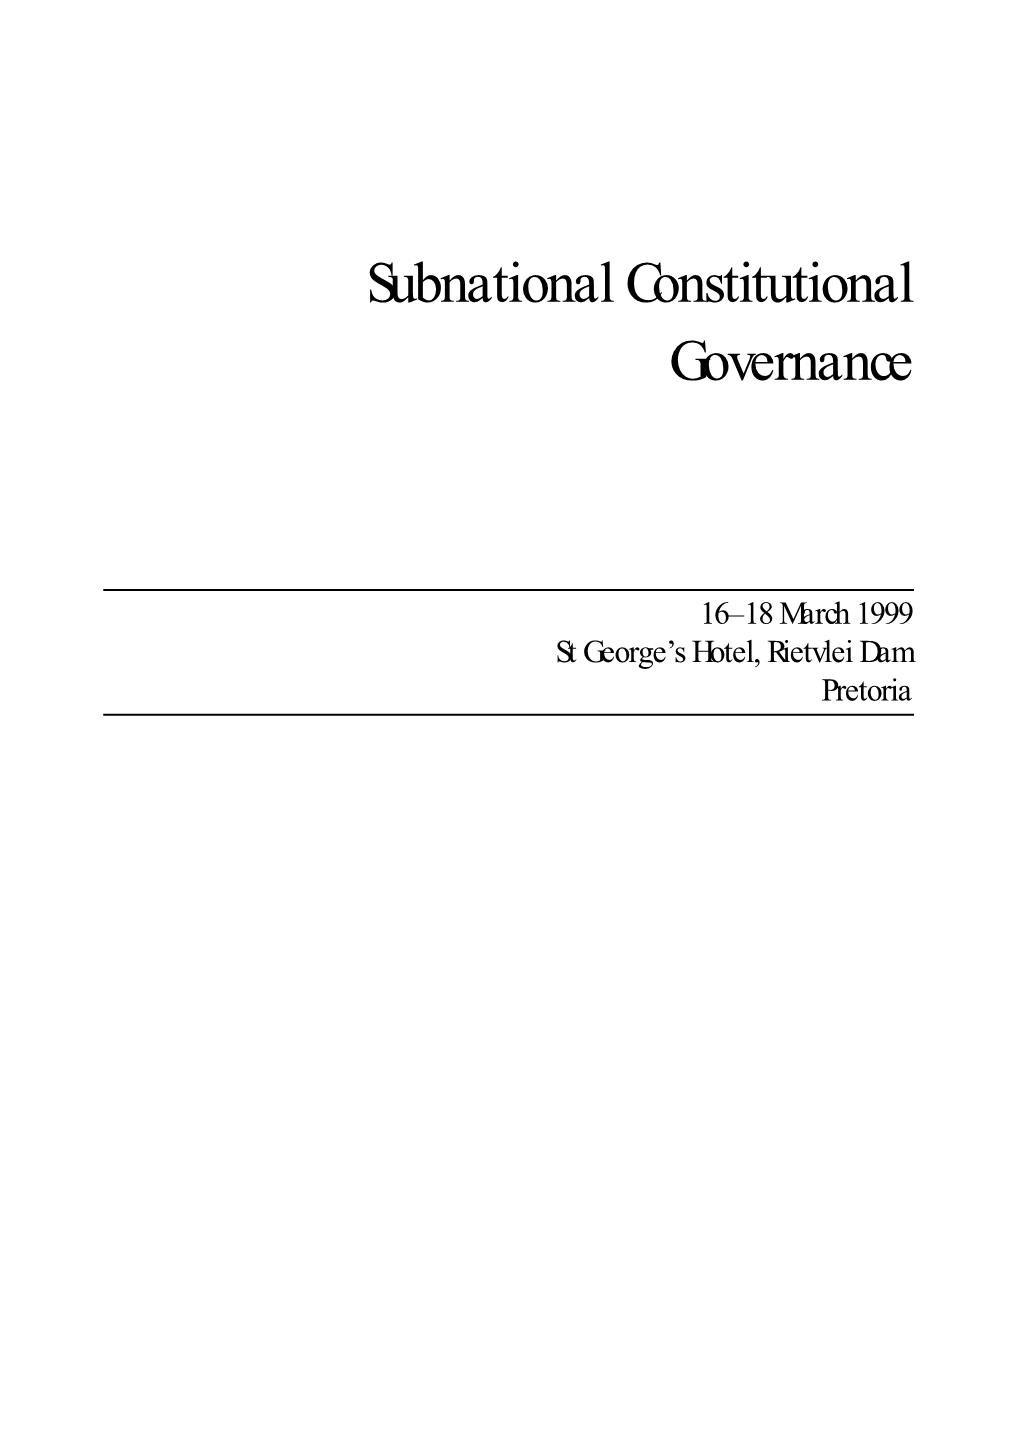 Subnational Constitutional Governance